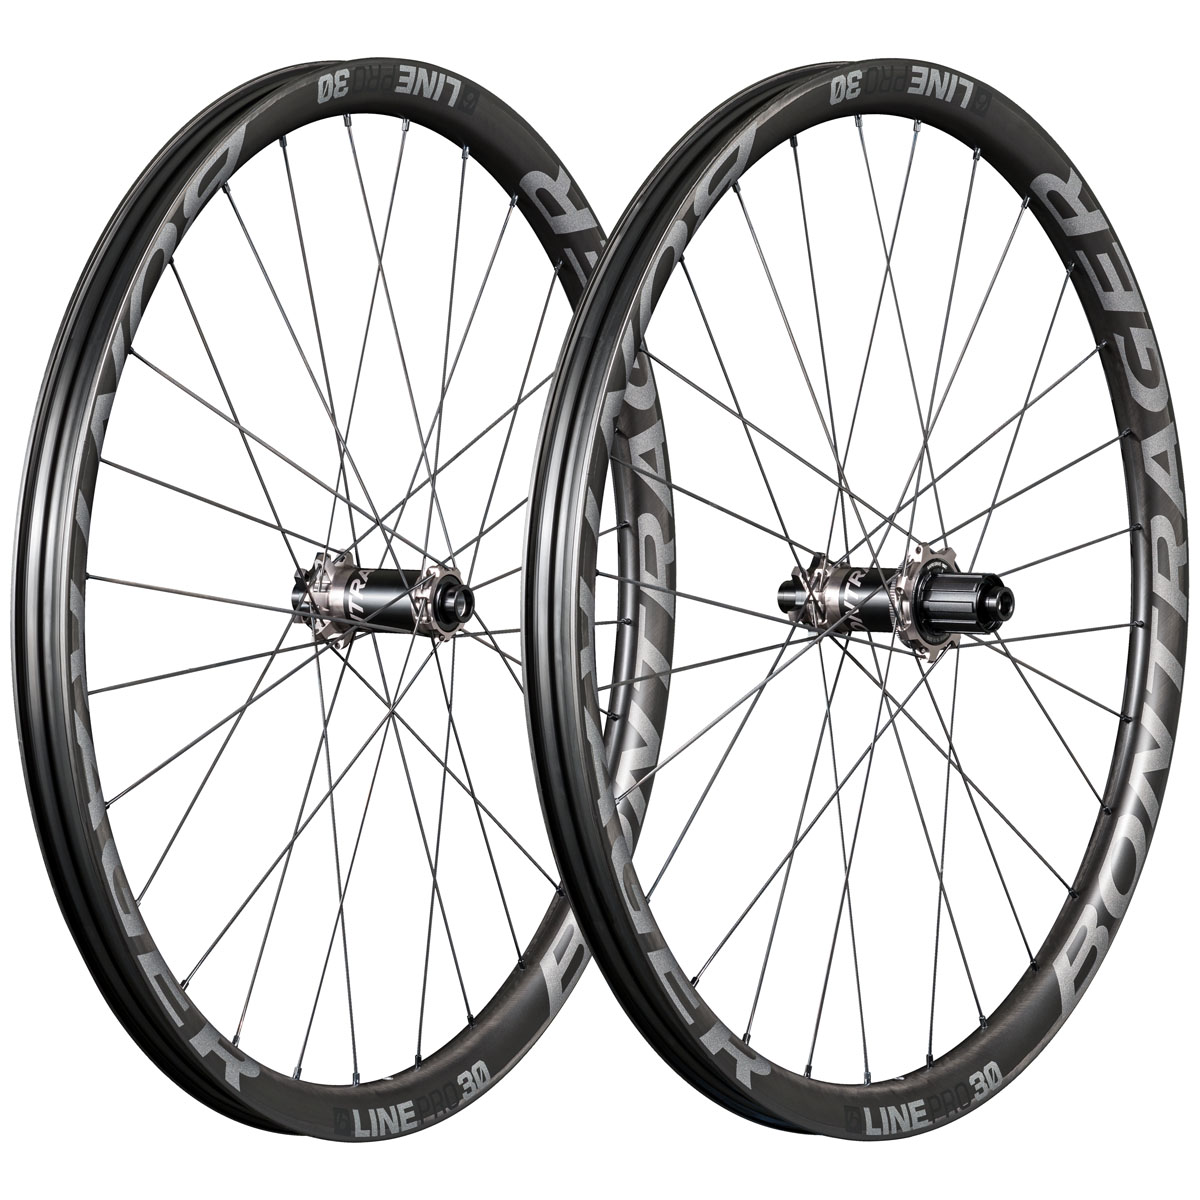 Bontrager now offers Two-Year, No-Cost Replacements for carbon wheel owners